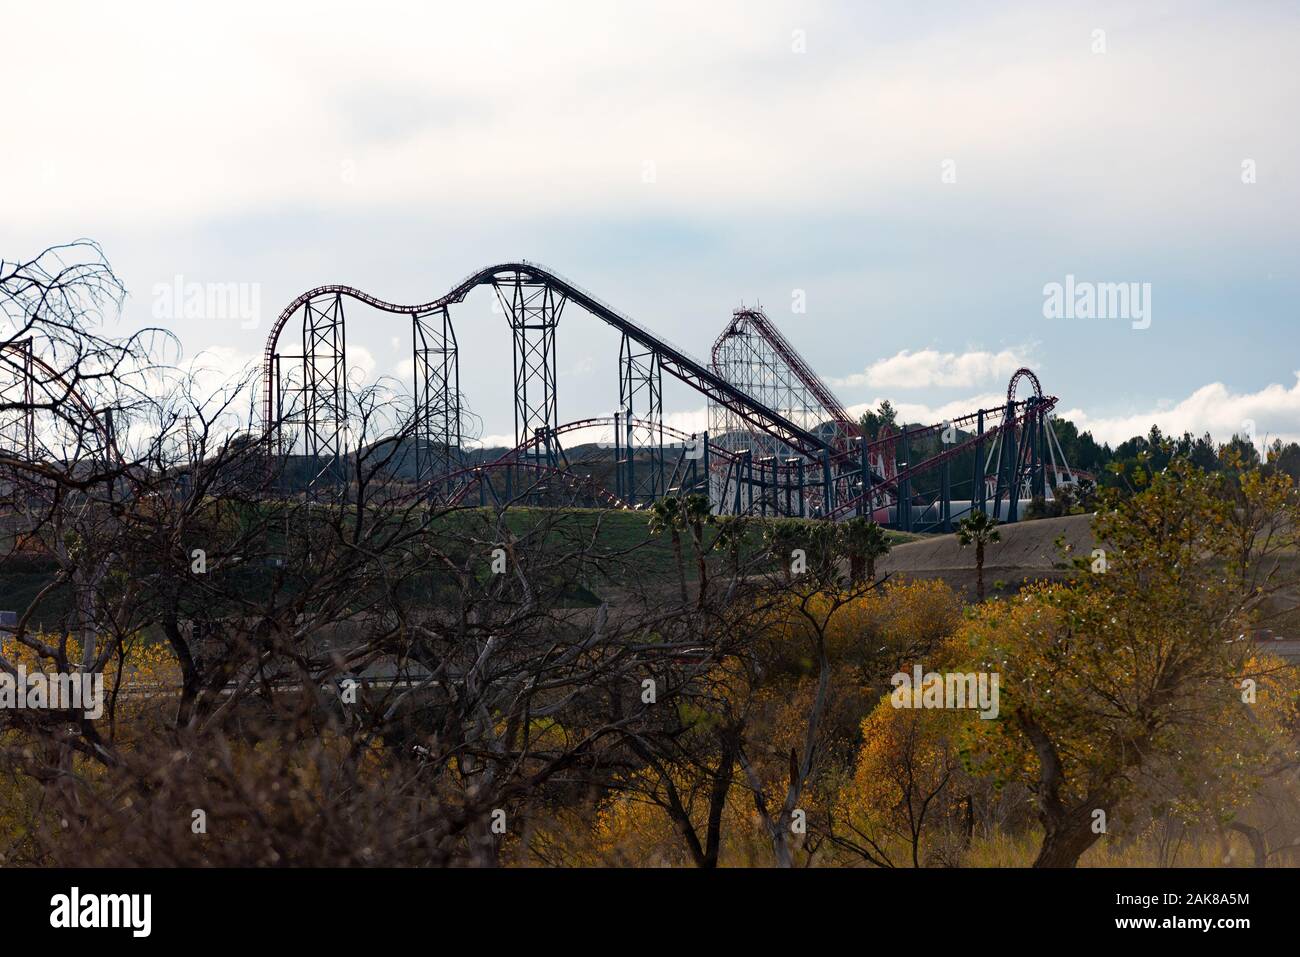 Beautiful view of the Six flags park Stock Photo